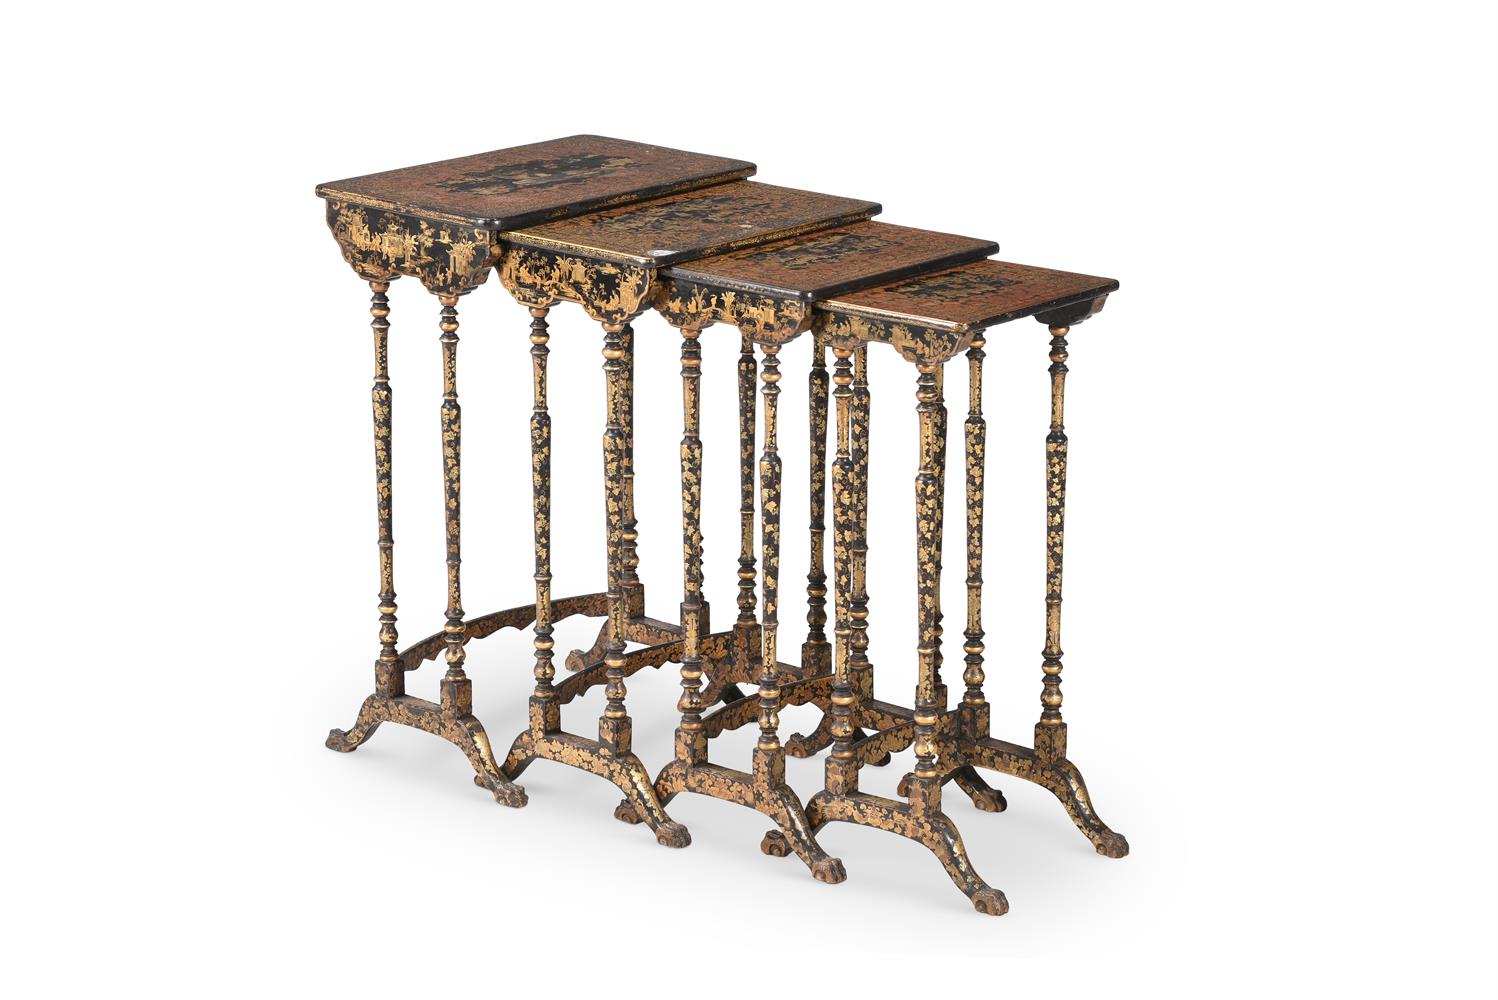 A SET OF FOUR CHINESE EXPORT BLACK AND GILT LACQUER QUARTETTO TABLES, CIRCA 1820